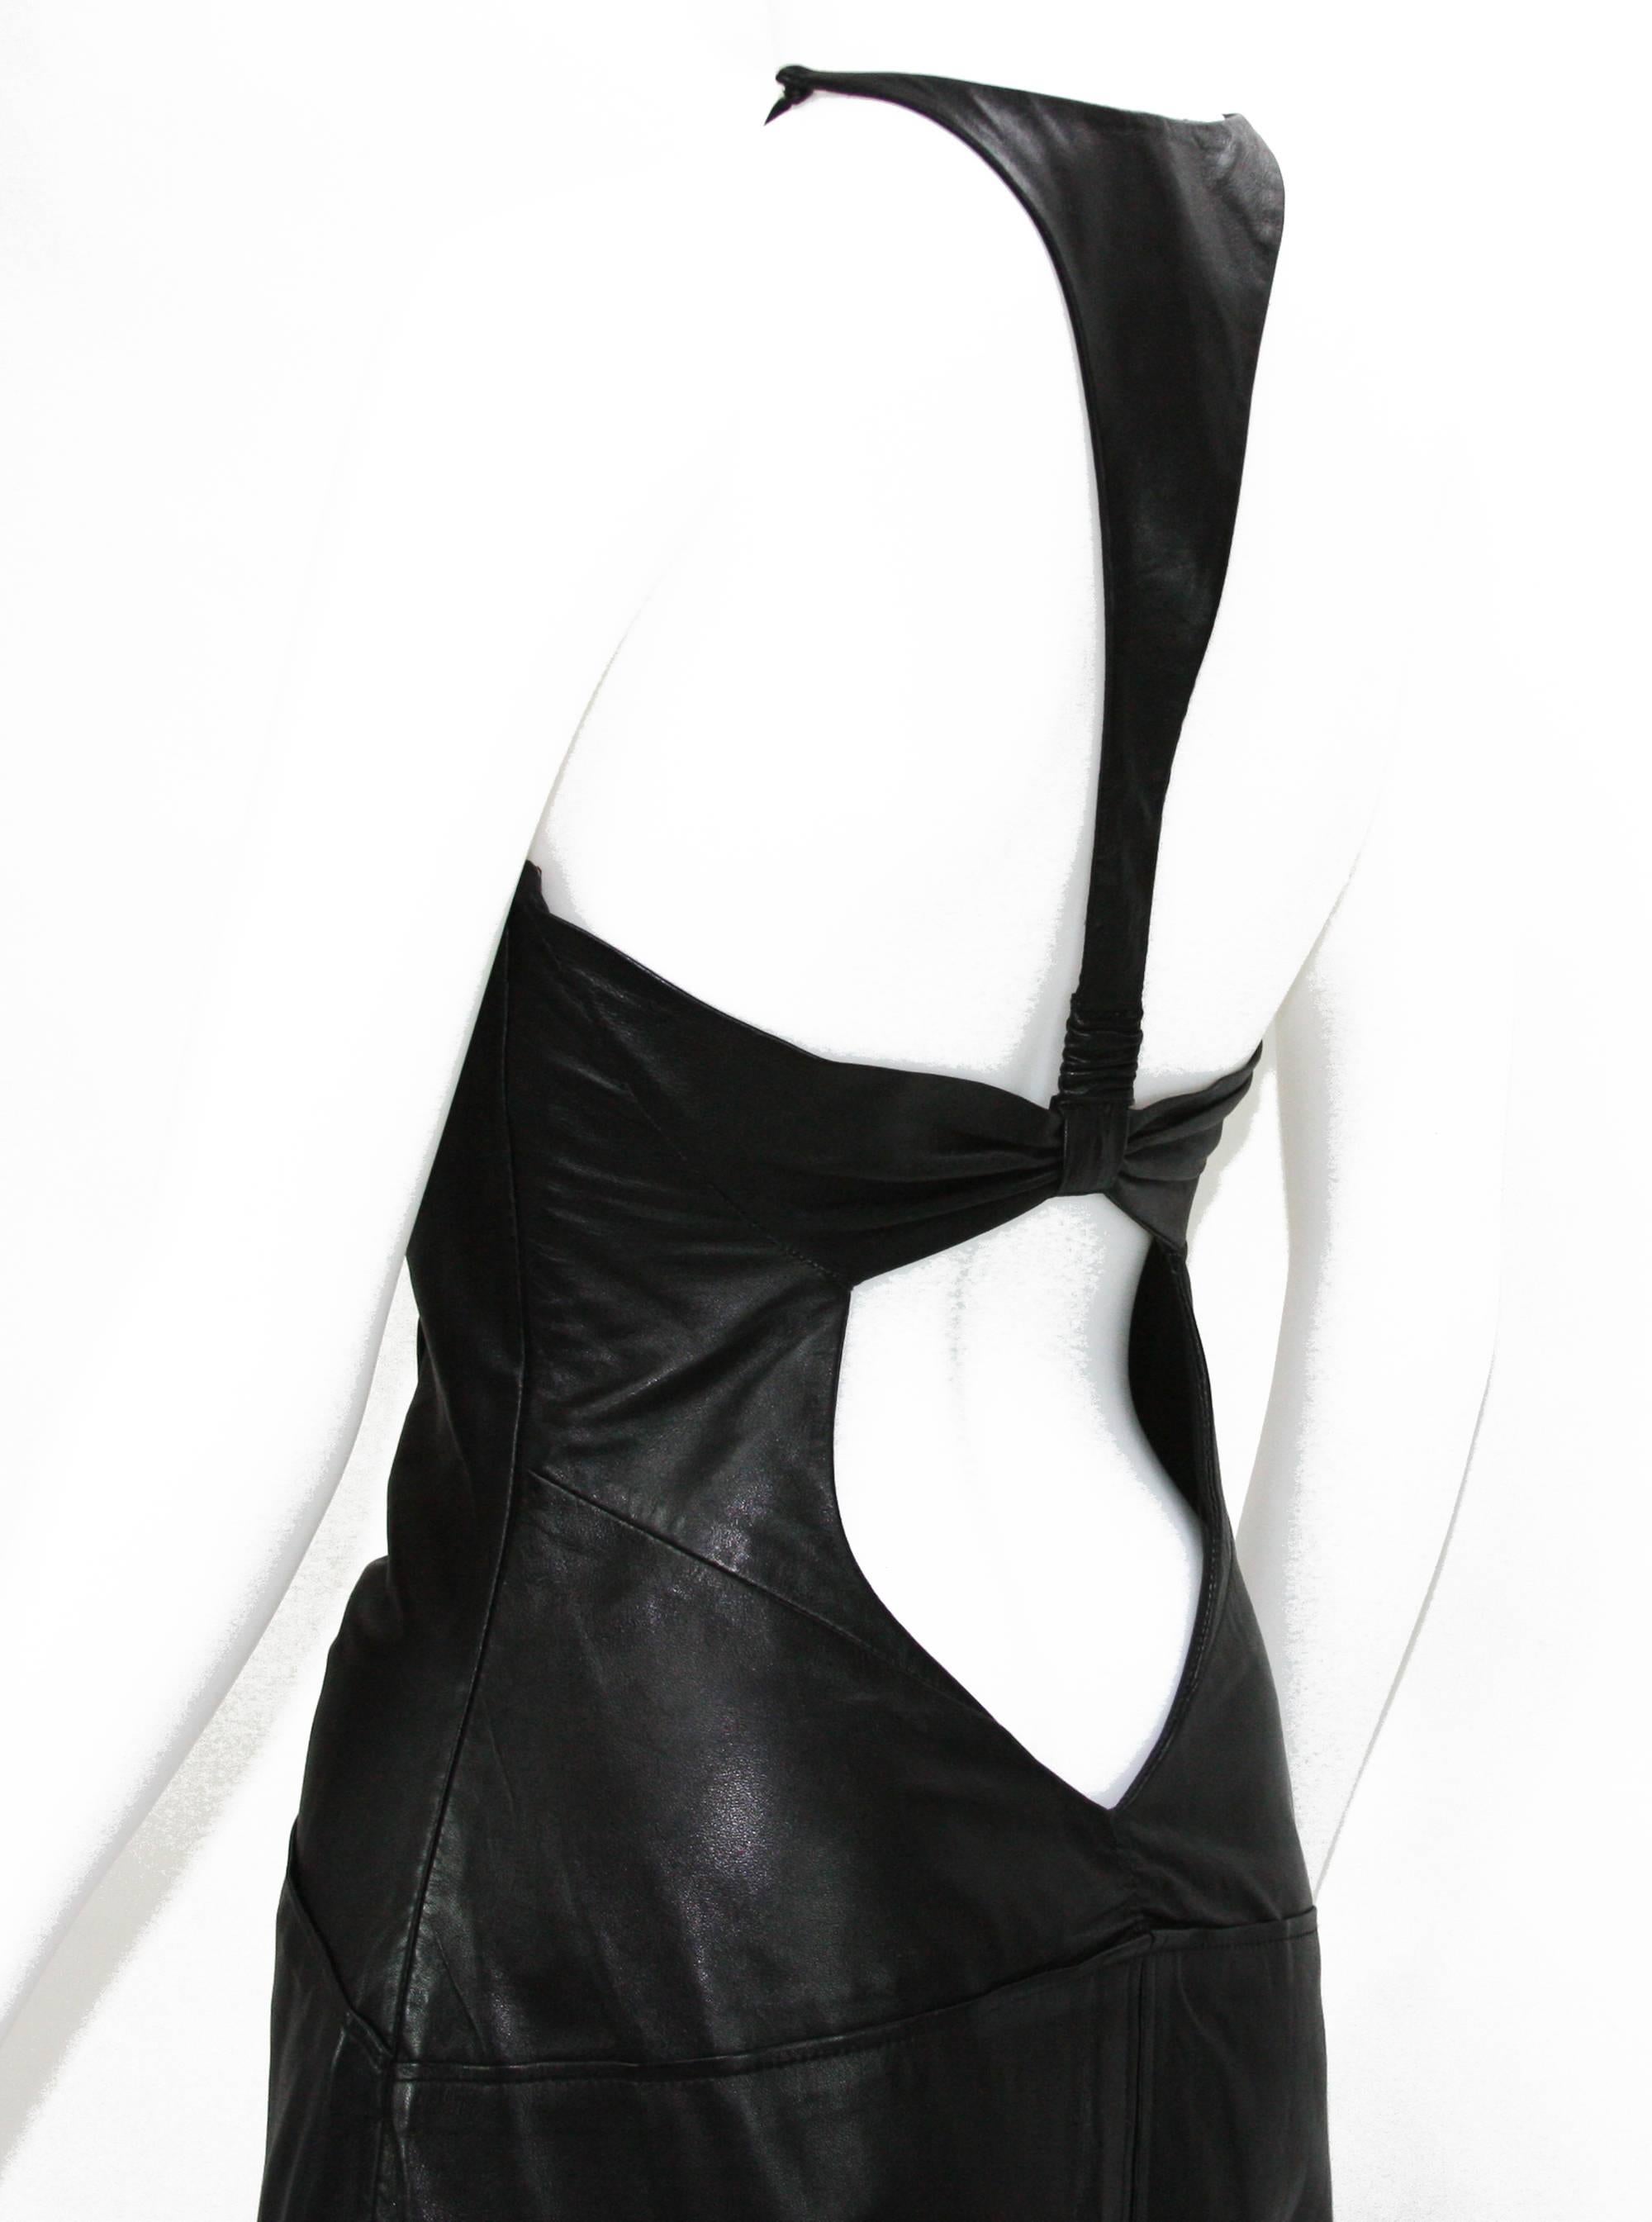 Tom Ford for Gucci 2004 Collection Black Leather Cocktail Dress 44 4